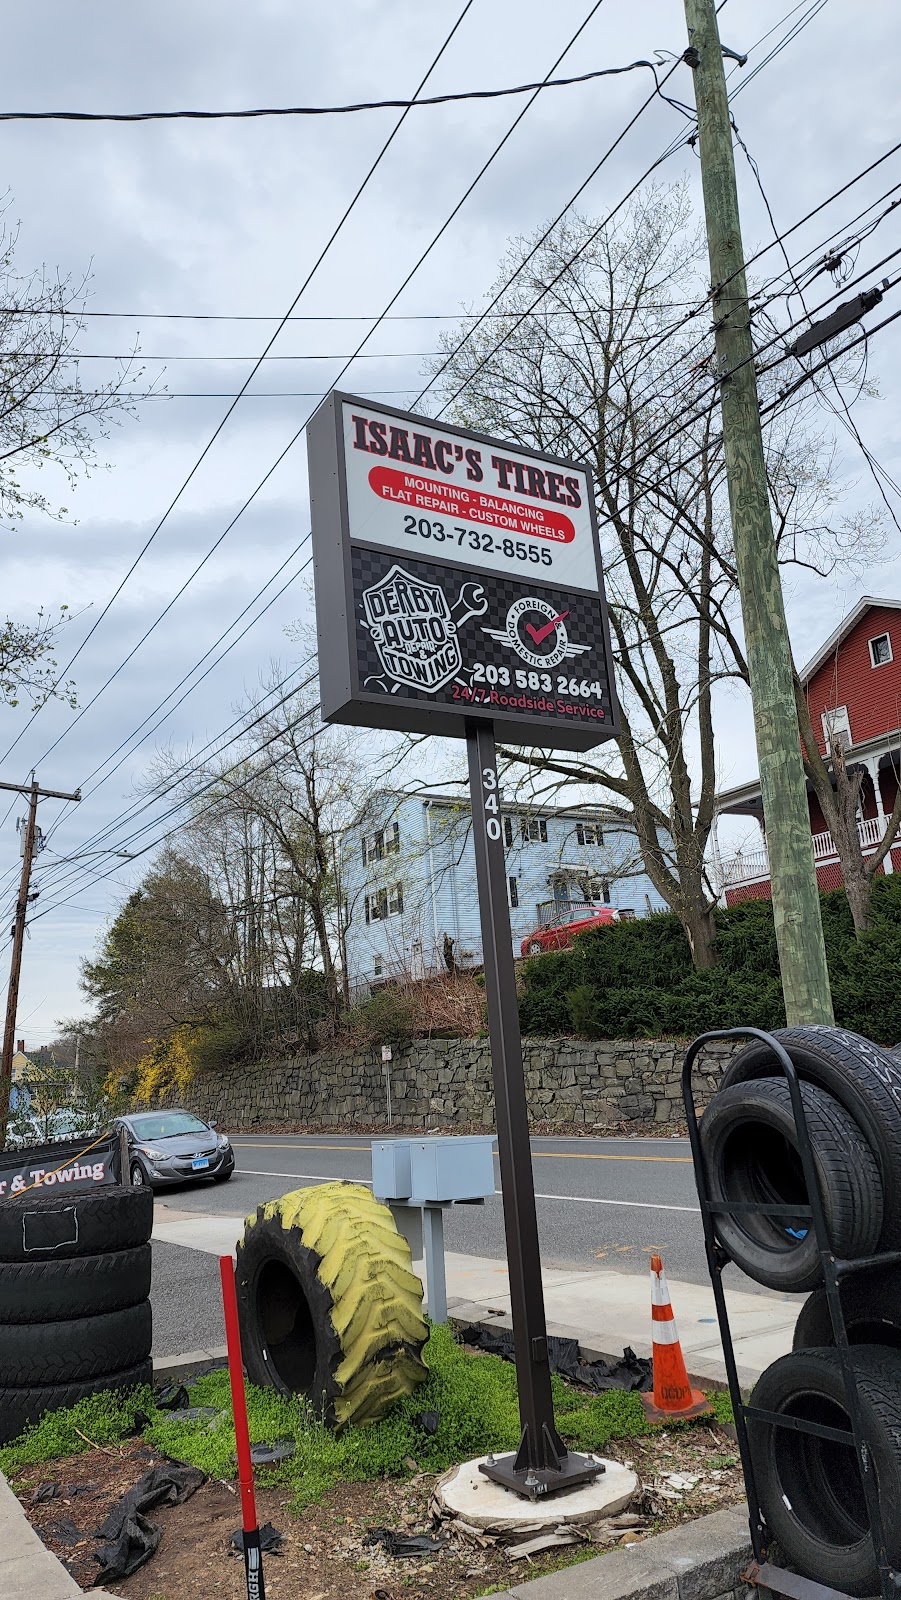 Isaacs tires | 340 Derby Ave, Derby, CT 06418 | Phone: (203) 732-8555